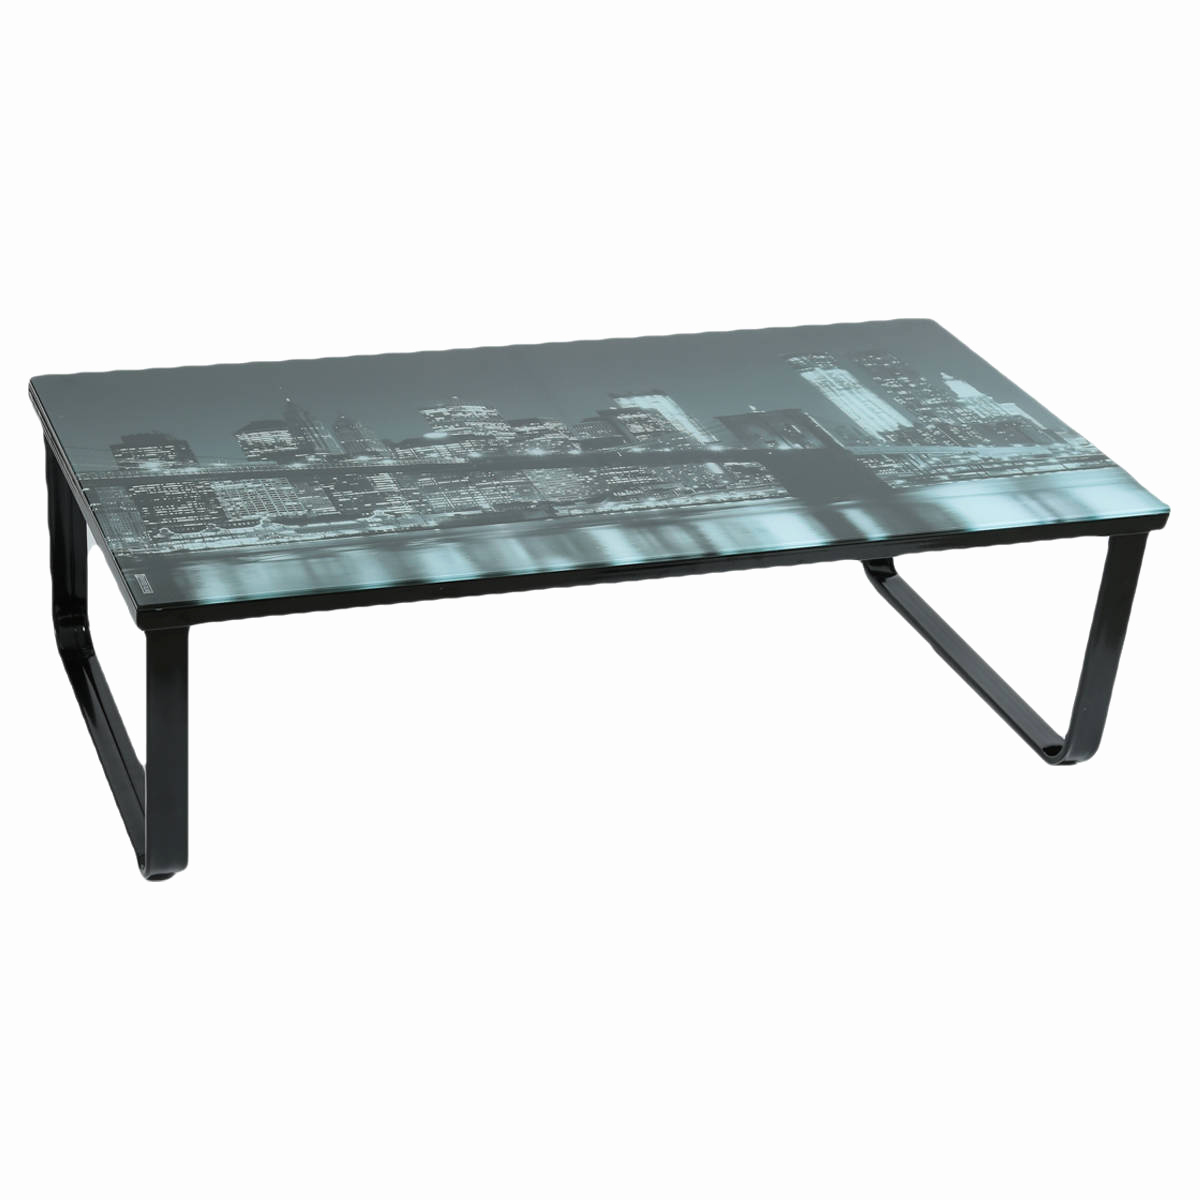 Table basse 3 pieds gifi